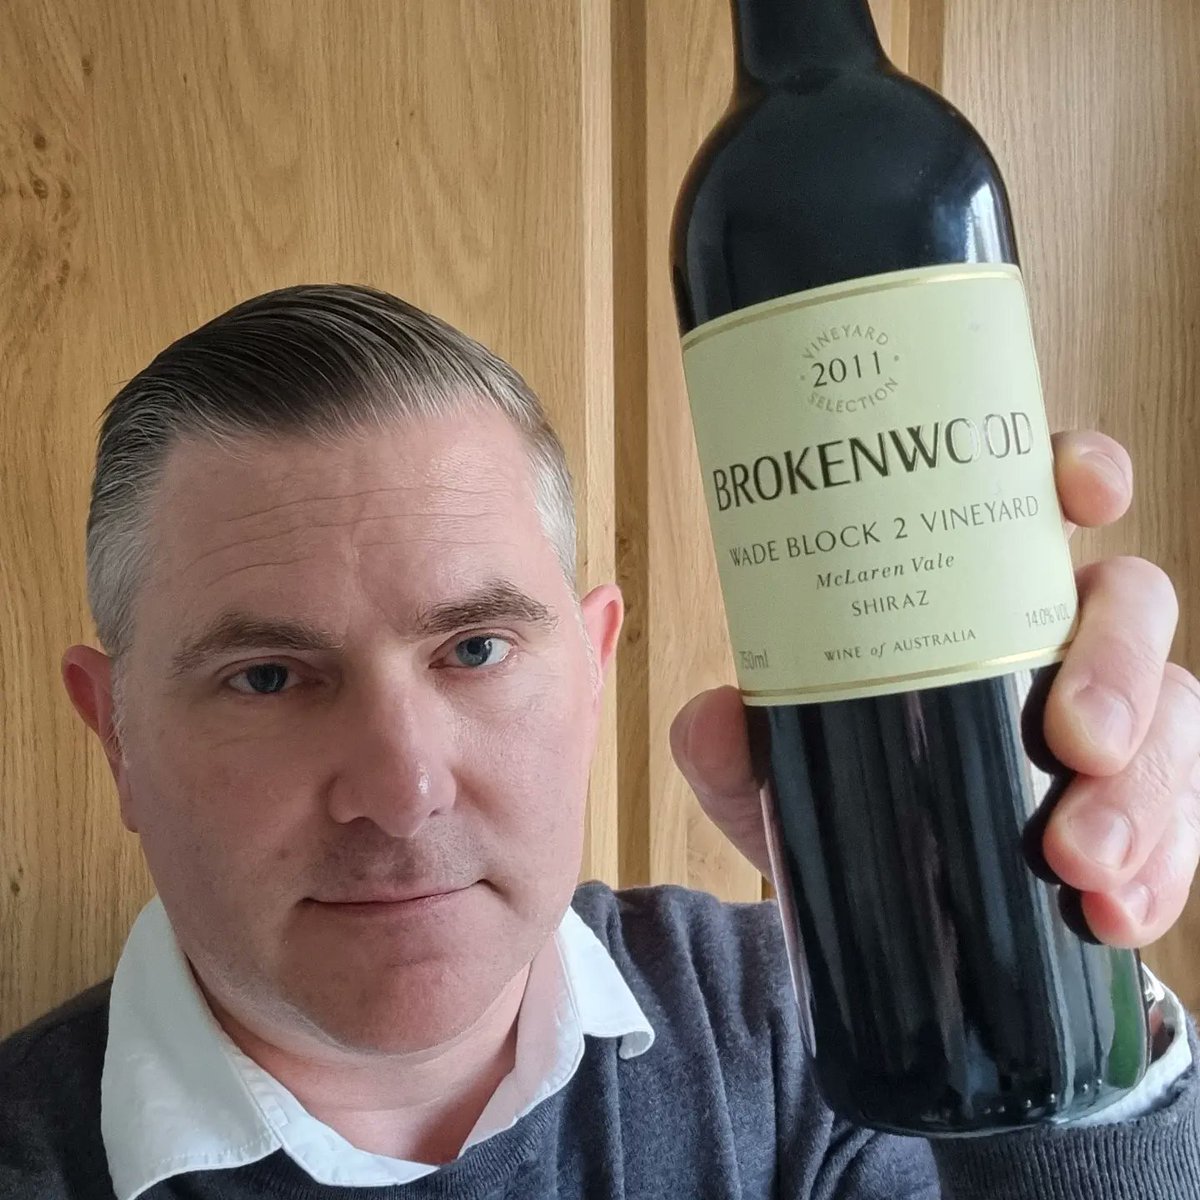 How is this an aged wine? This @Brokenwood 2011 McLaren Vale shiraz is just chock full of brambly fruits, and so fresh and lively. Would never have guessed it if served blind. Stunning drop! #wine #winelover #winelovers